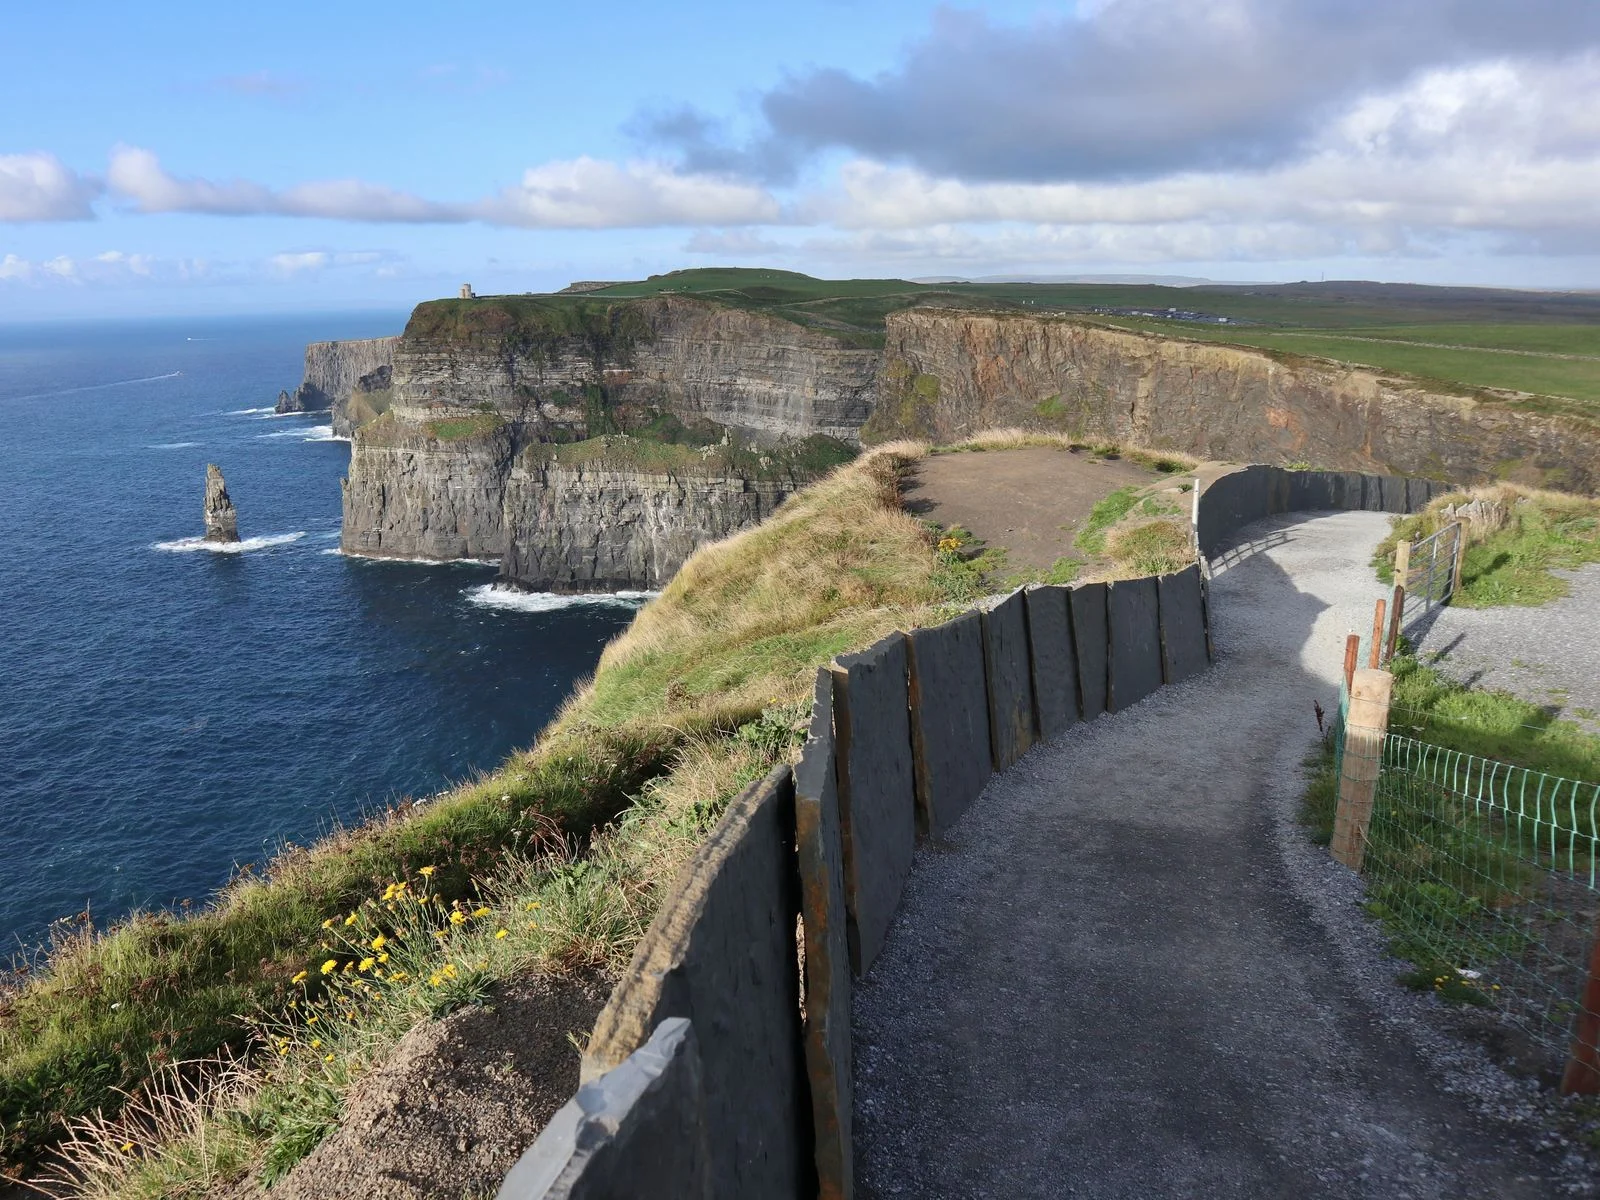 A barricaded path beside Cliffs of Moher, with calm sea, is one of the best hikes in Ireland